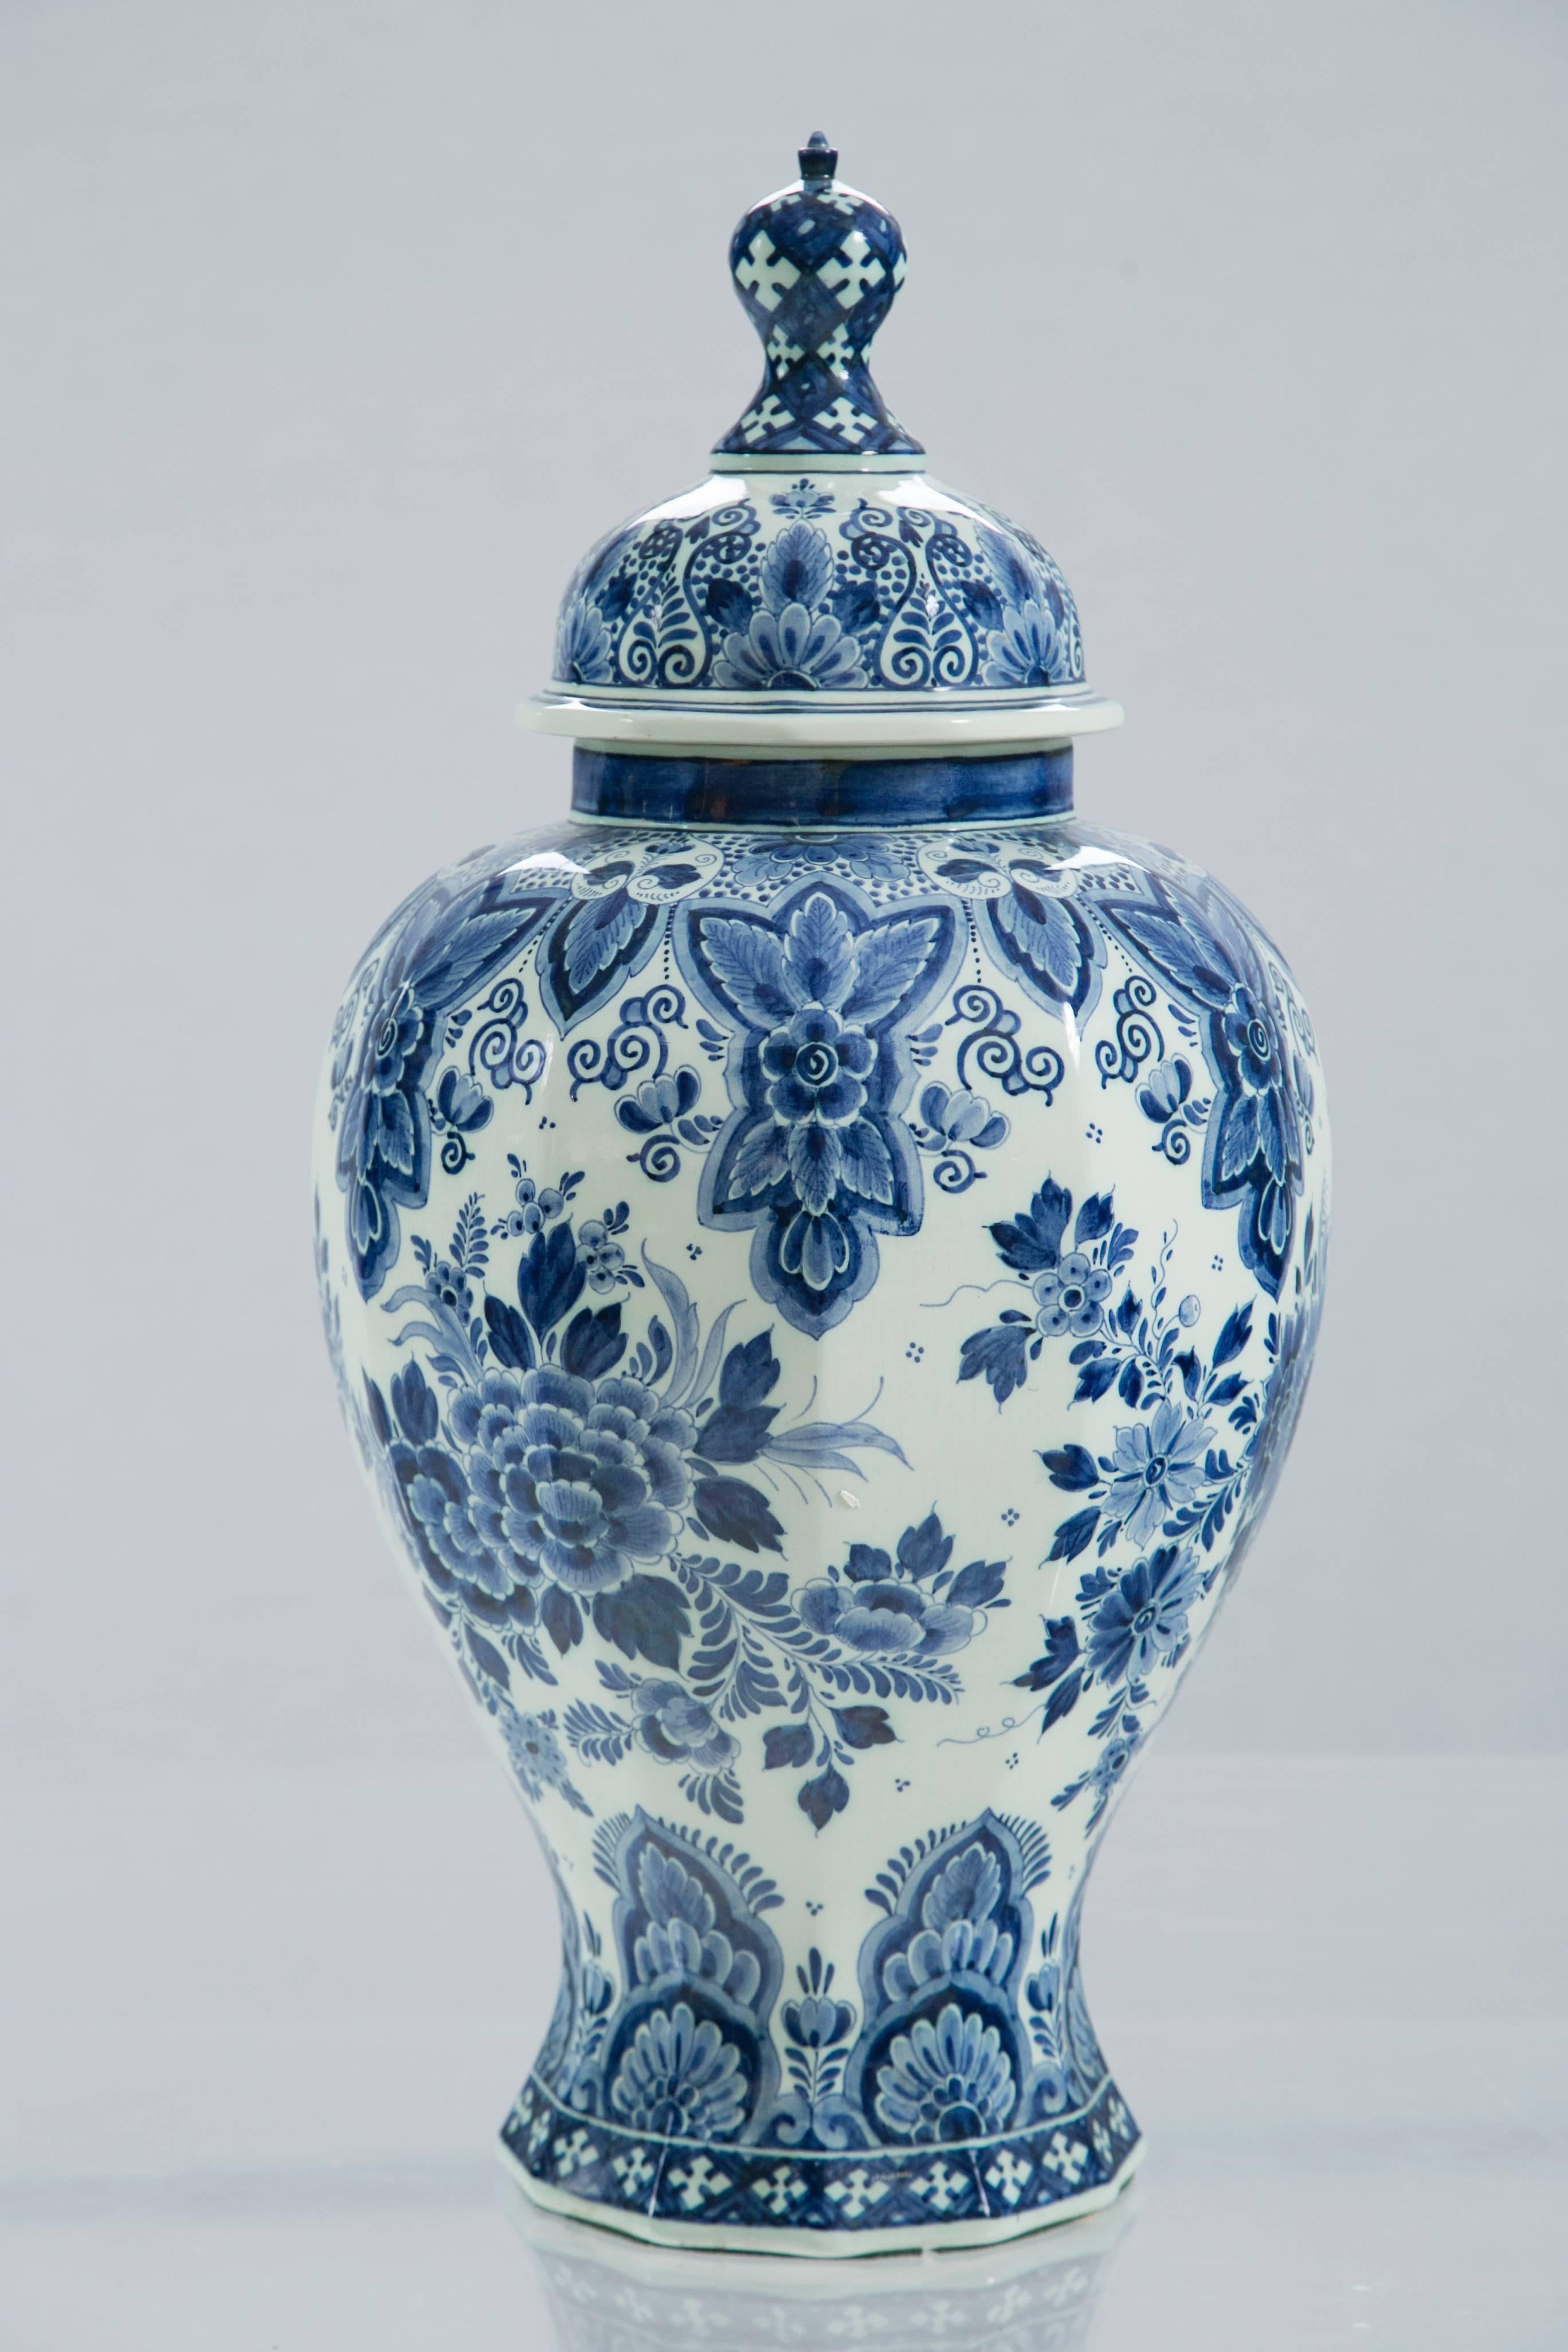 Wonderful ginger jar with gracefully geometric form and rich color. By Delft Pottery De Delftse Pauw, signed and numbered. A lovely find.